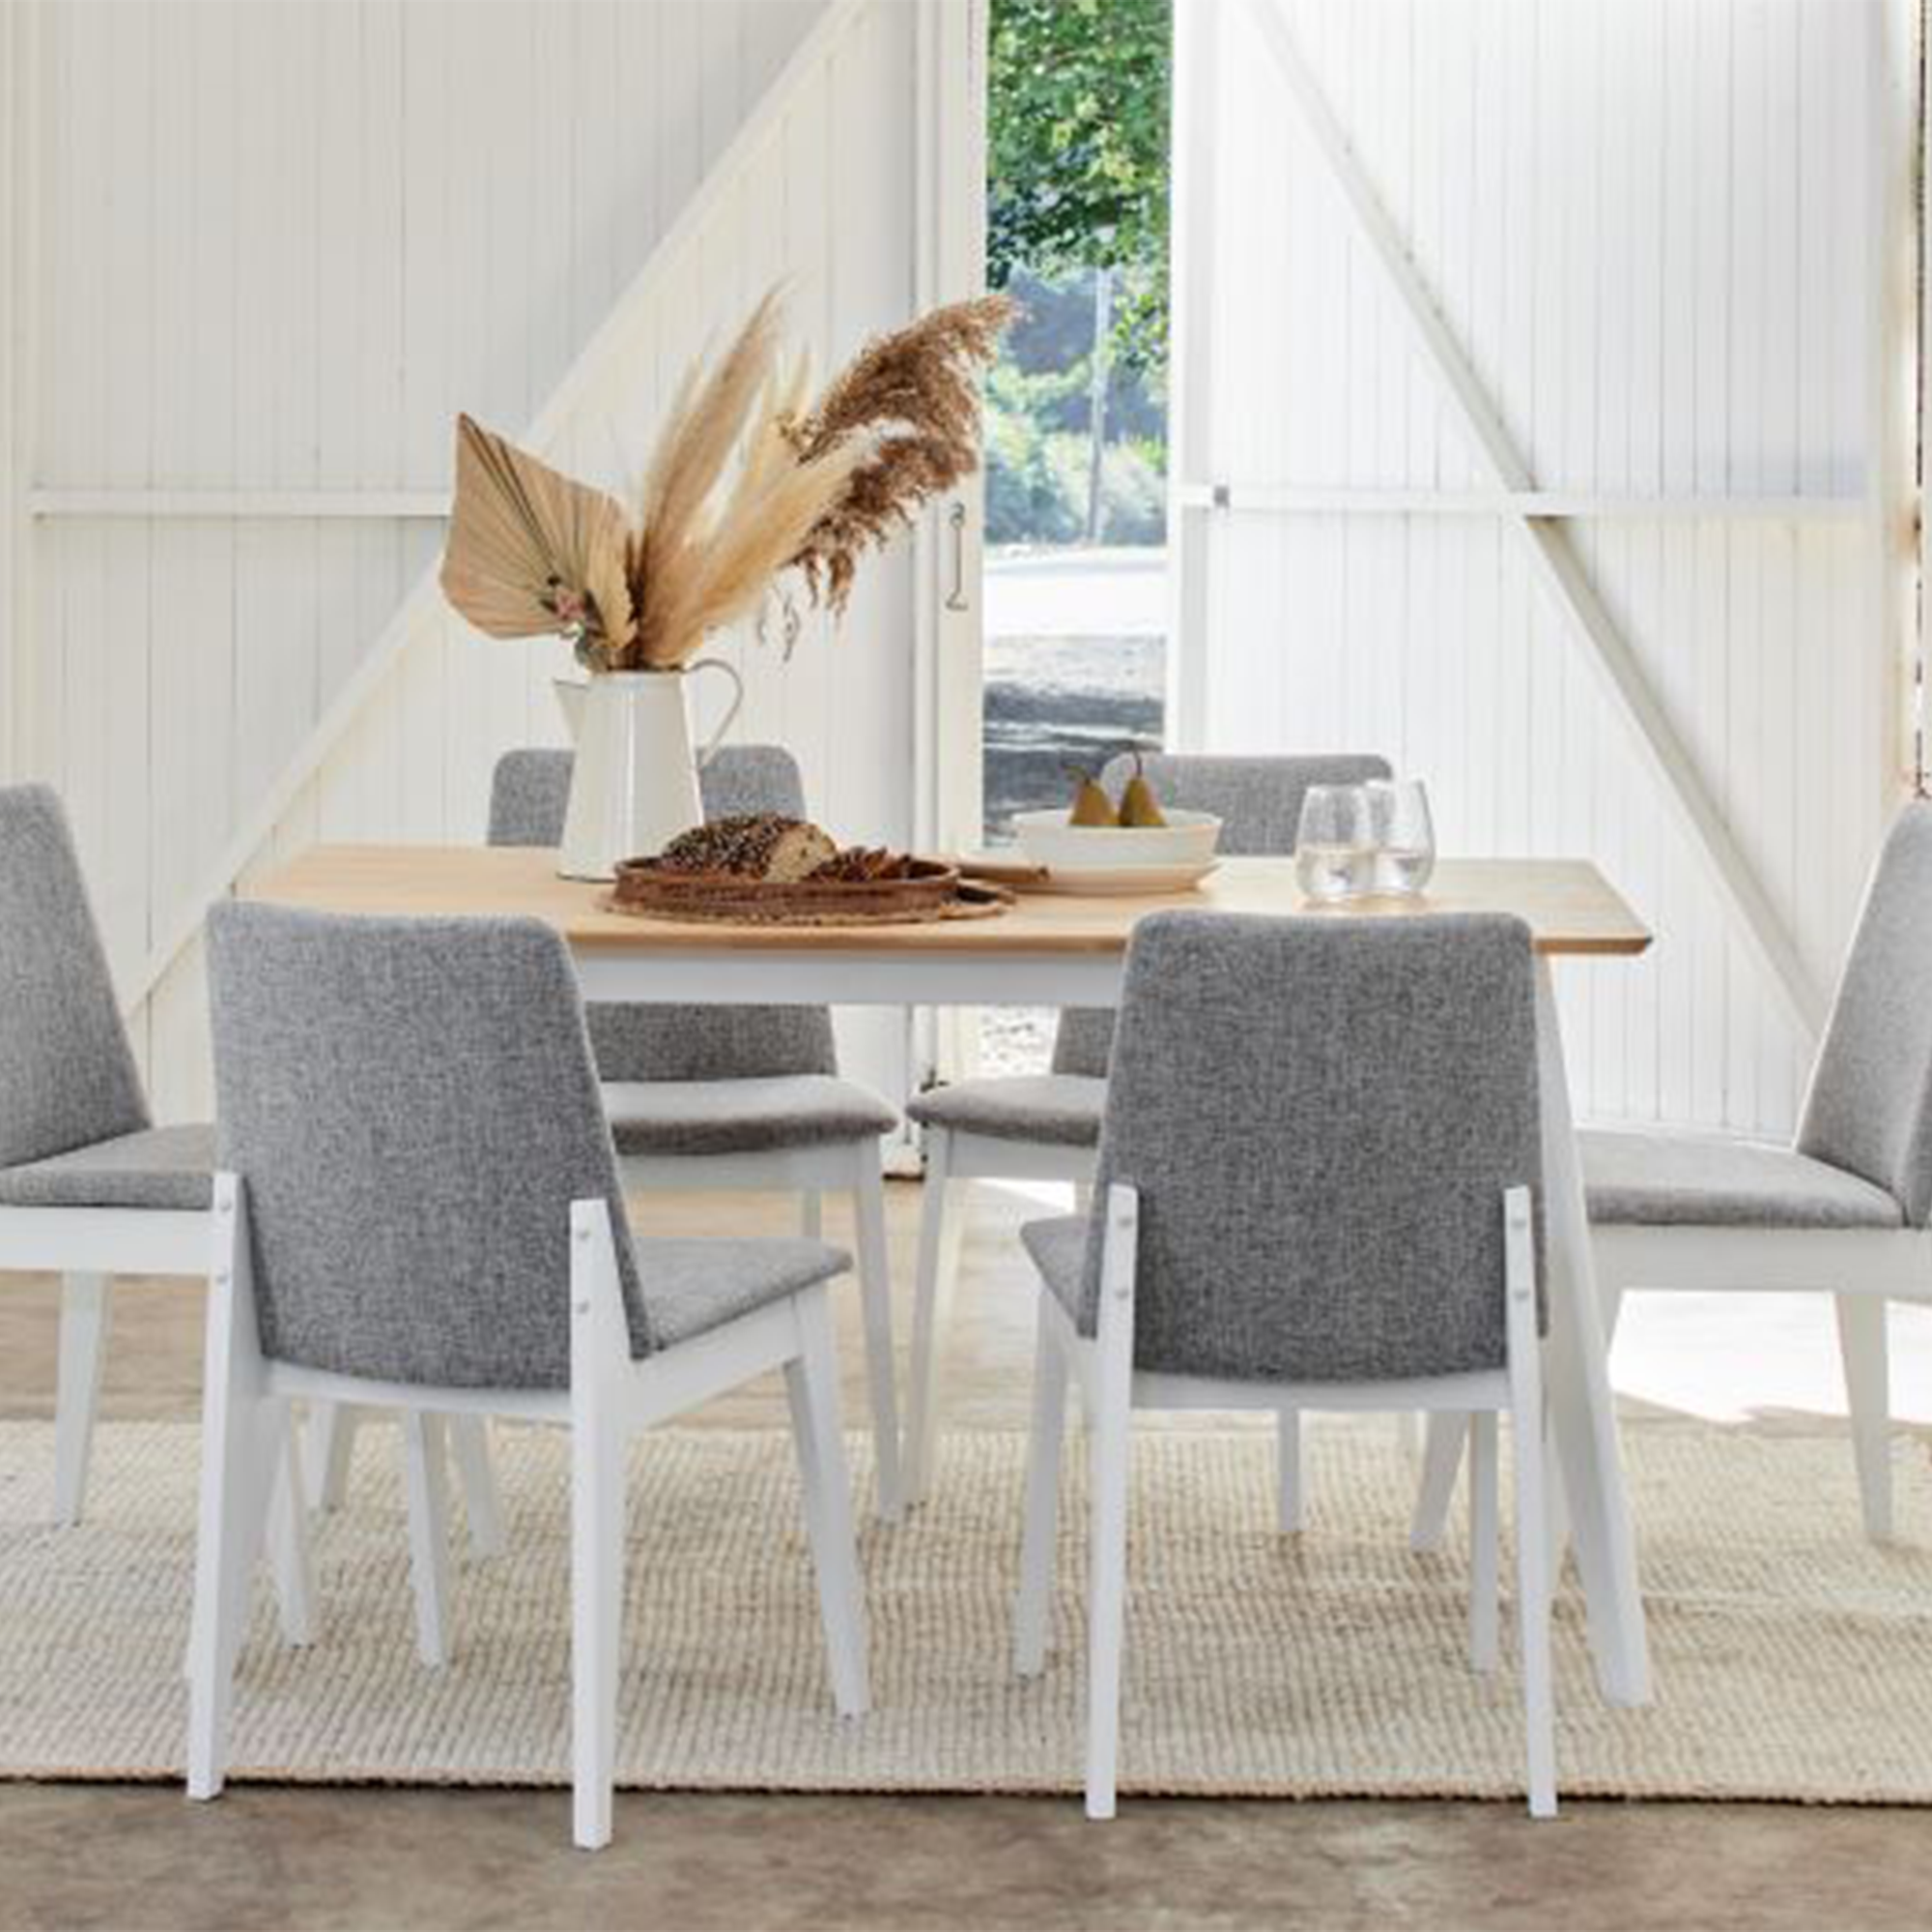 Full Double Pad White Wooden Dining Chair